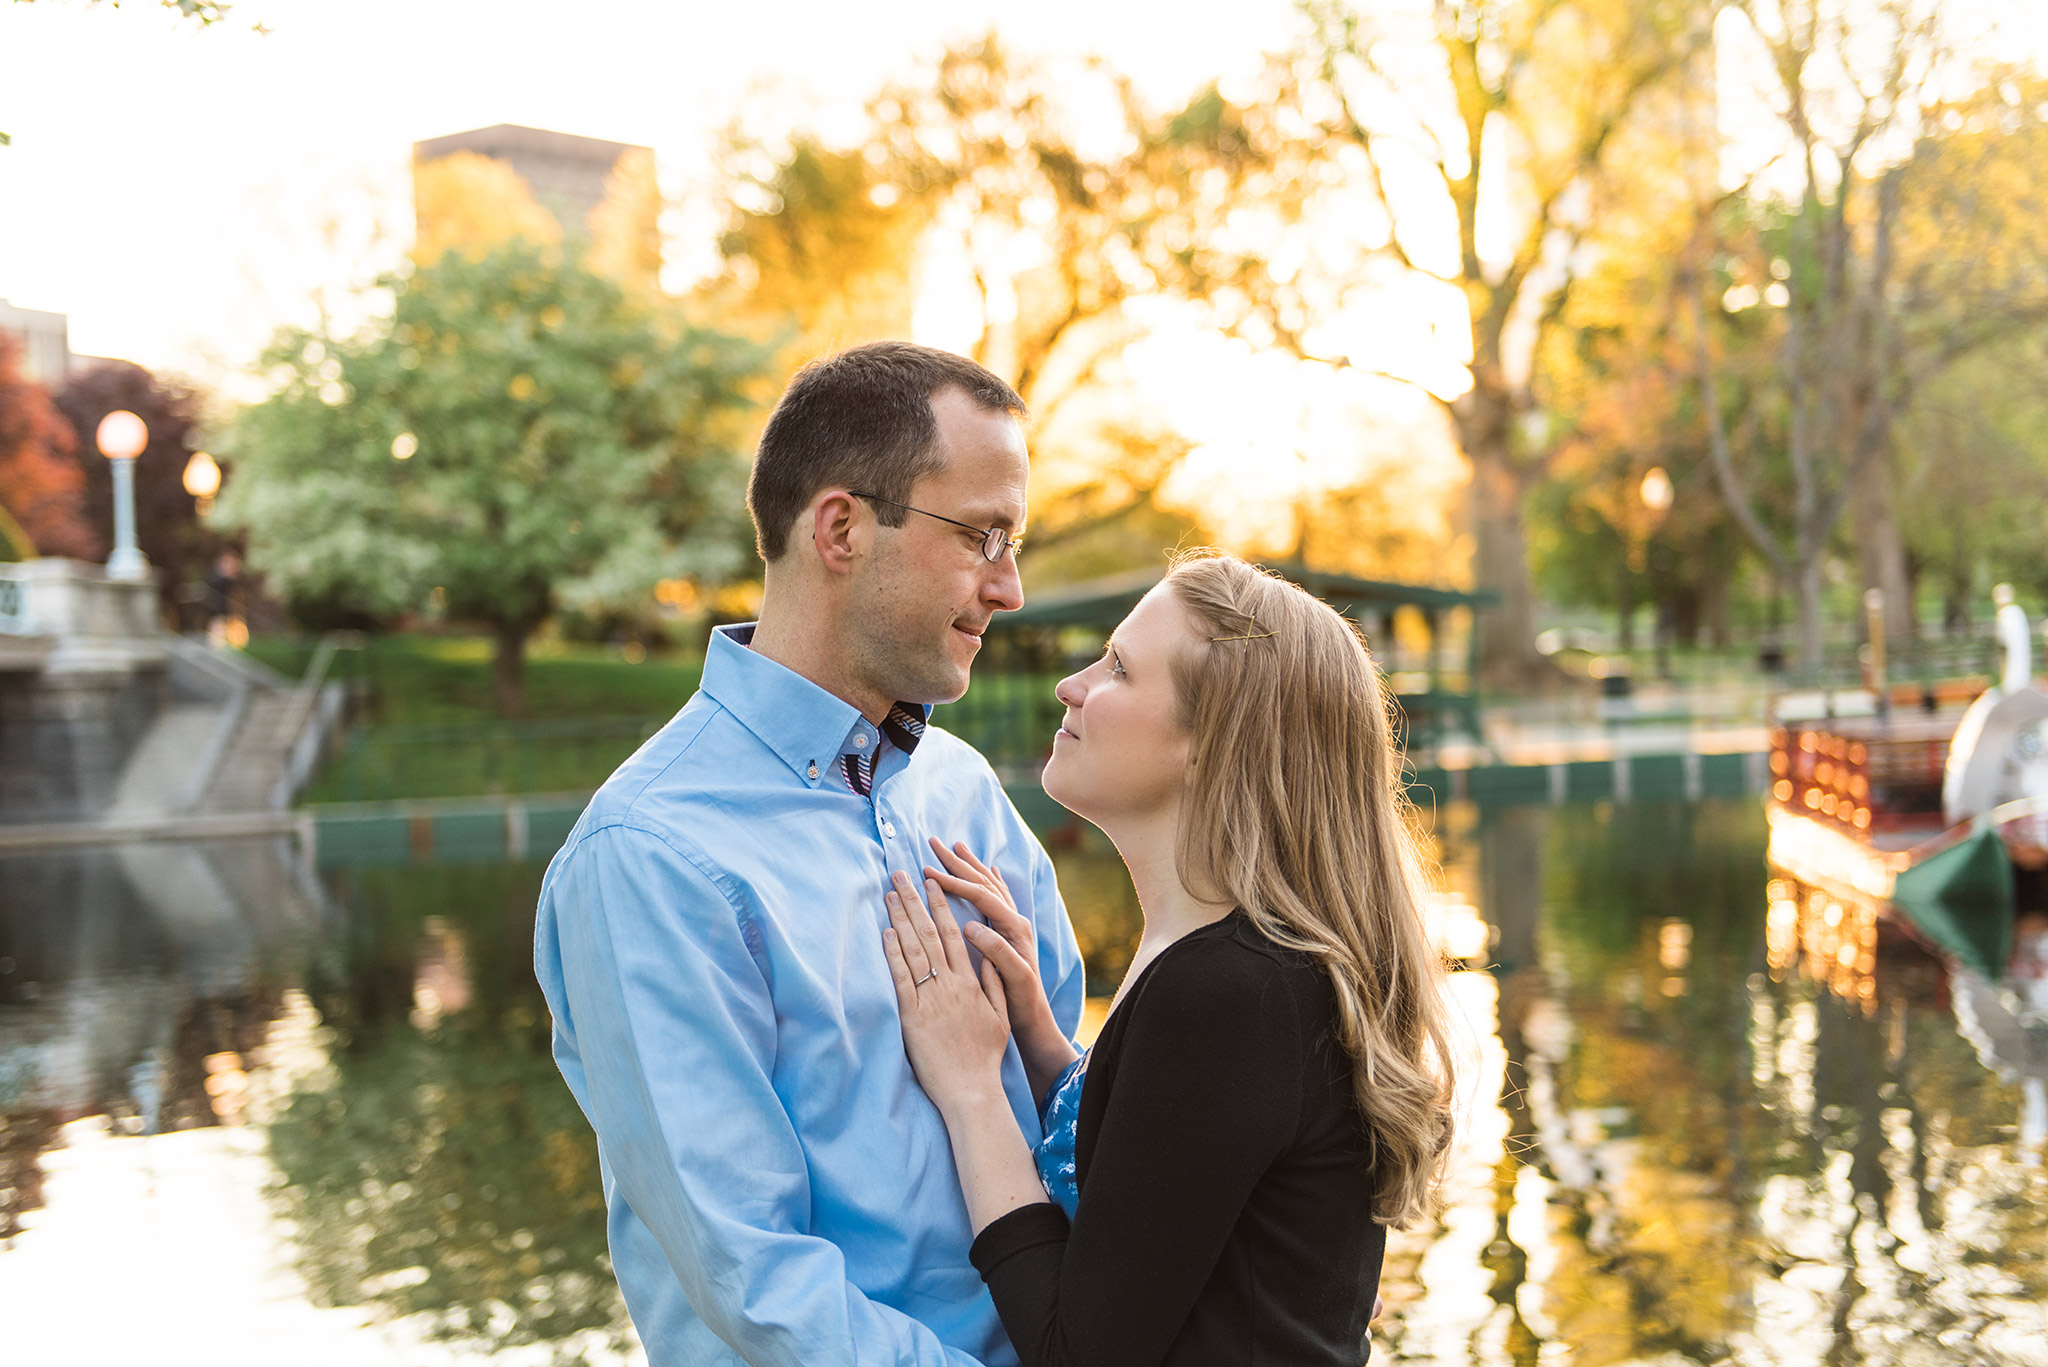 Classic + Modern Boston Public Garden, Beacon Hill, and Downtown Coffee Shop Sunrise Engagement Session | Jessica and Thomas | Lorna Stell | Photographer | Boston MA